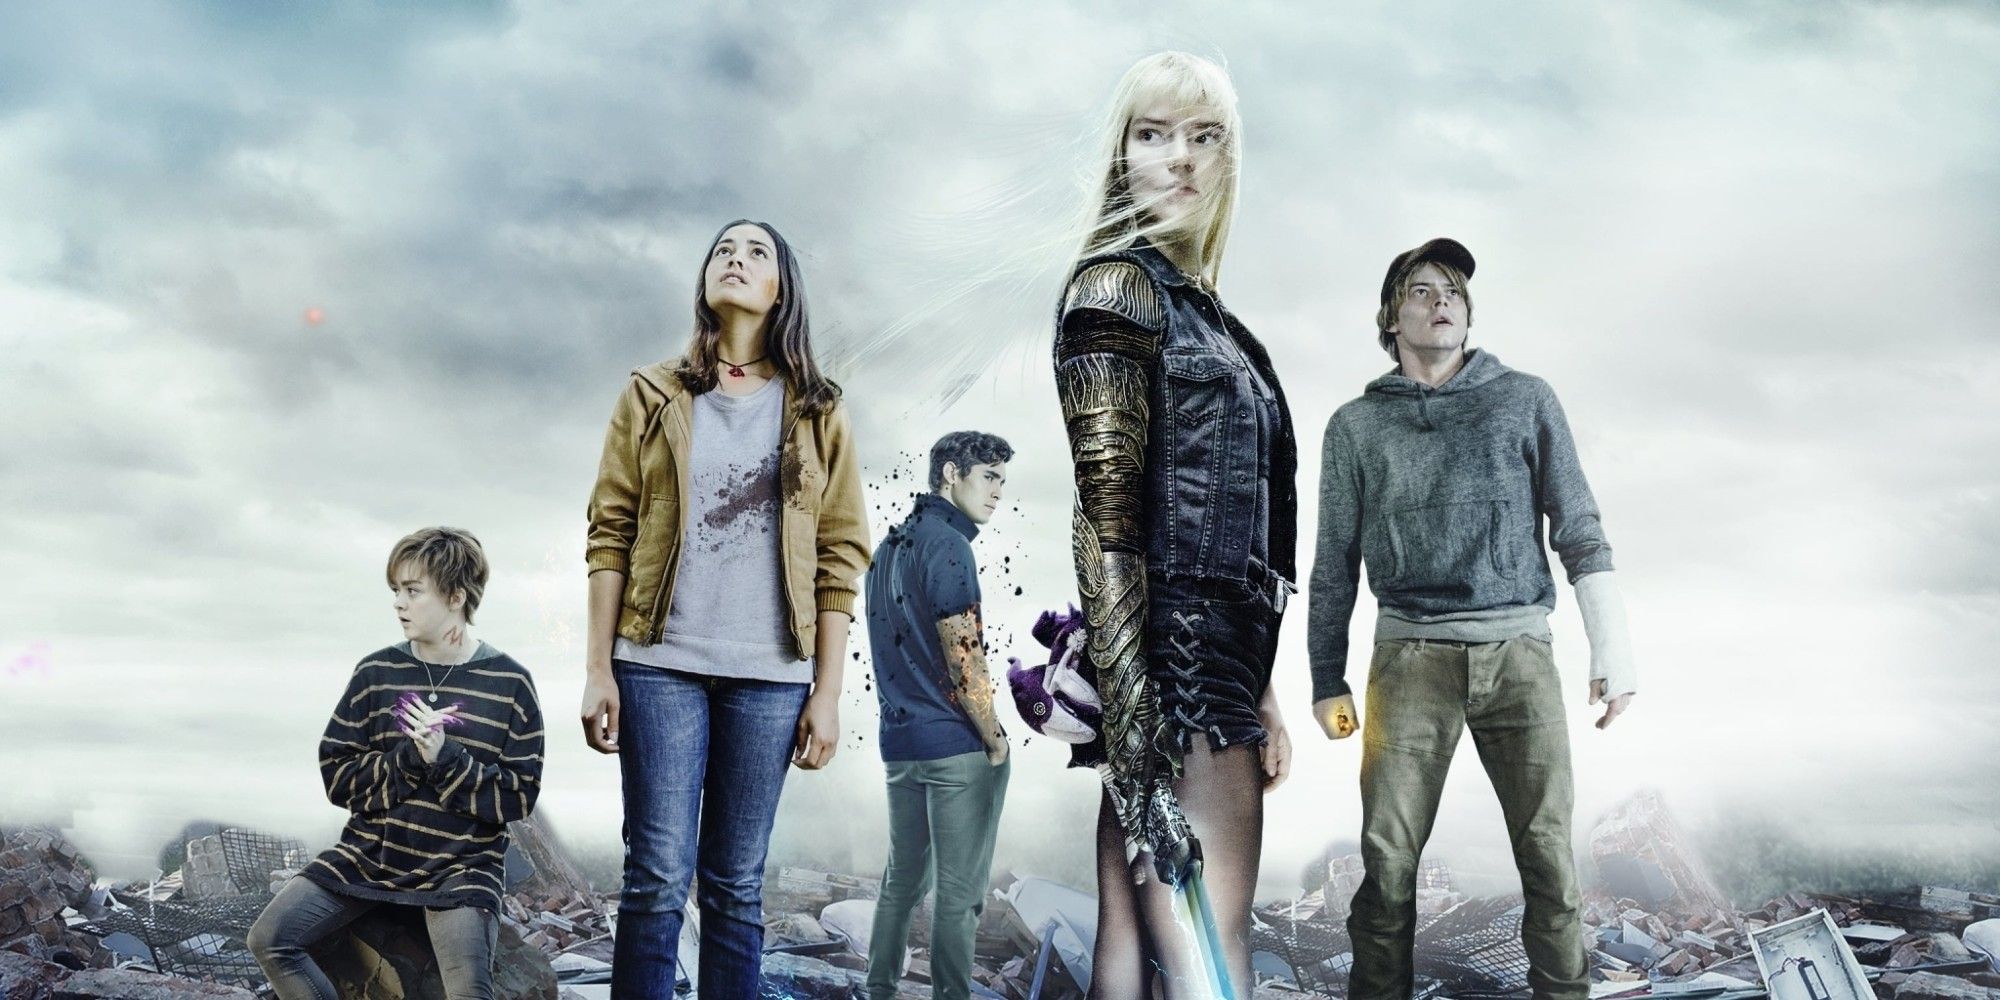 The New Mutants' trailer teams up scares and young superheroes